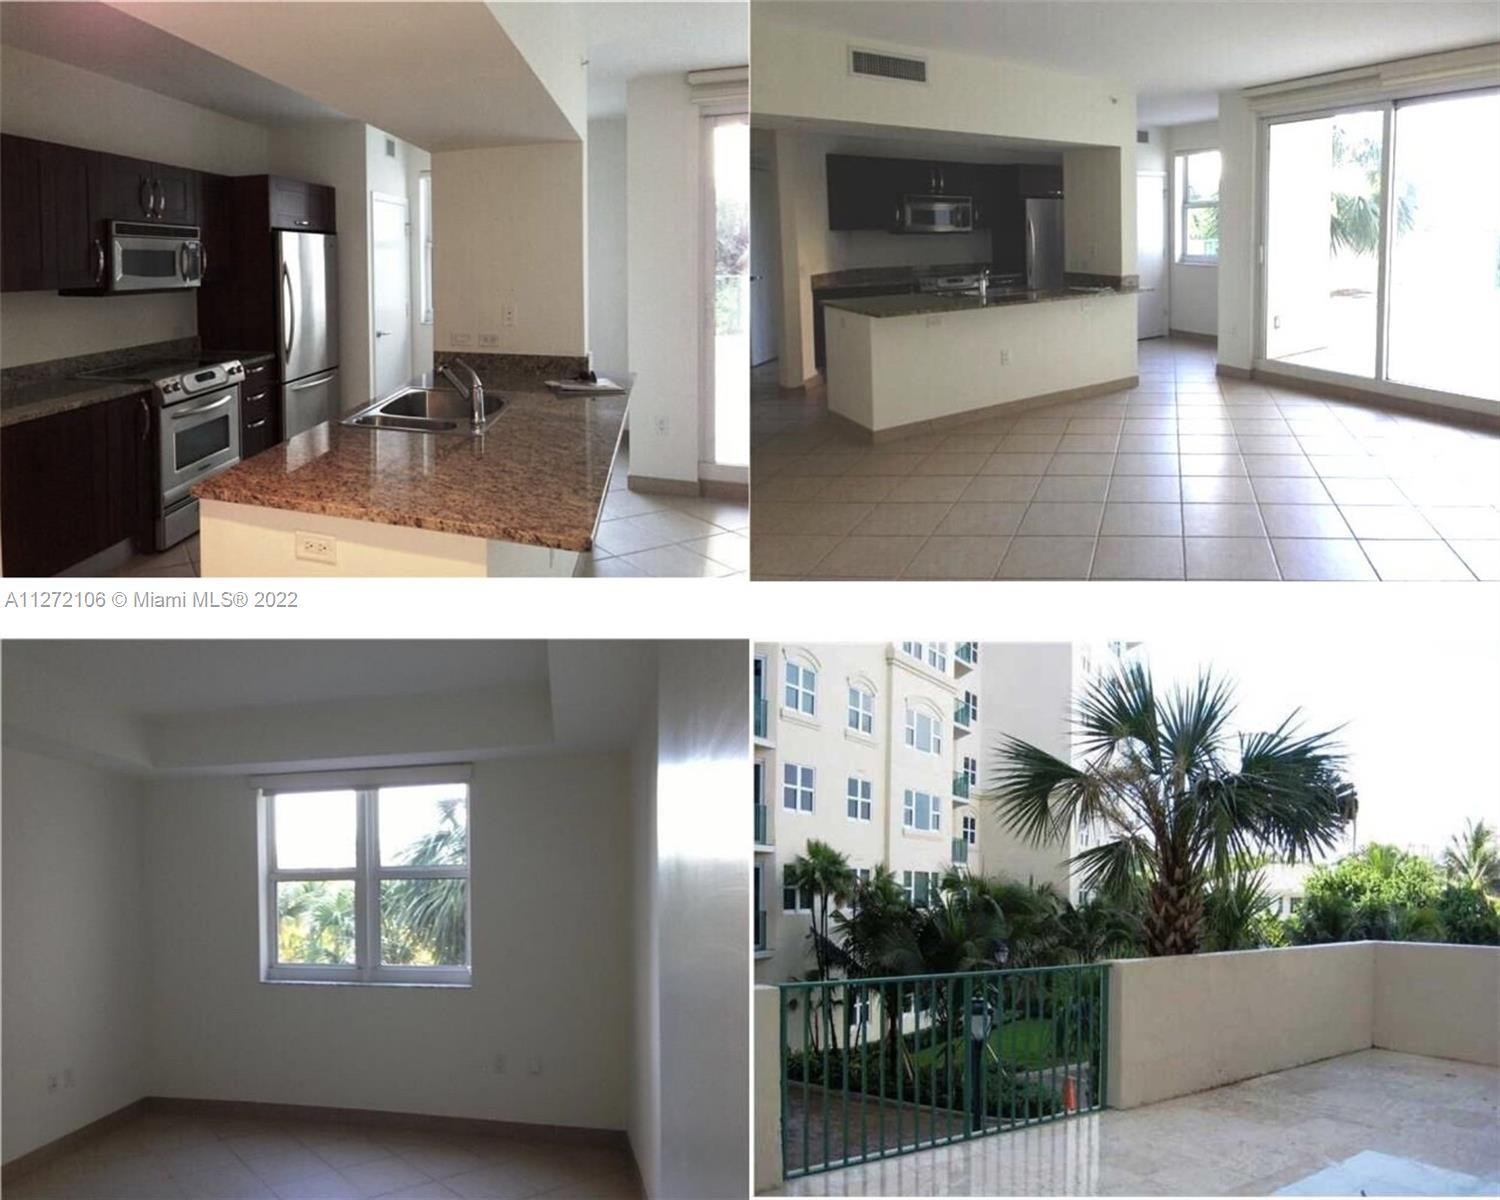 Luxury apartment one bedroom one bath with huge 561 sqft patio. Turnberry Village condo is located i